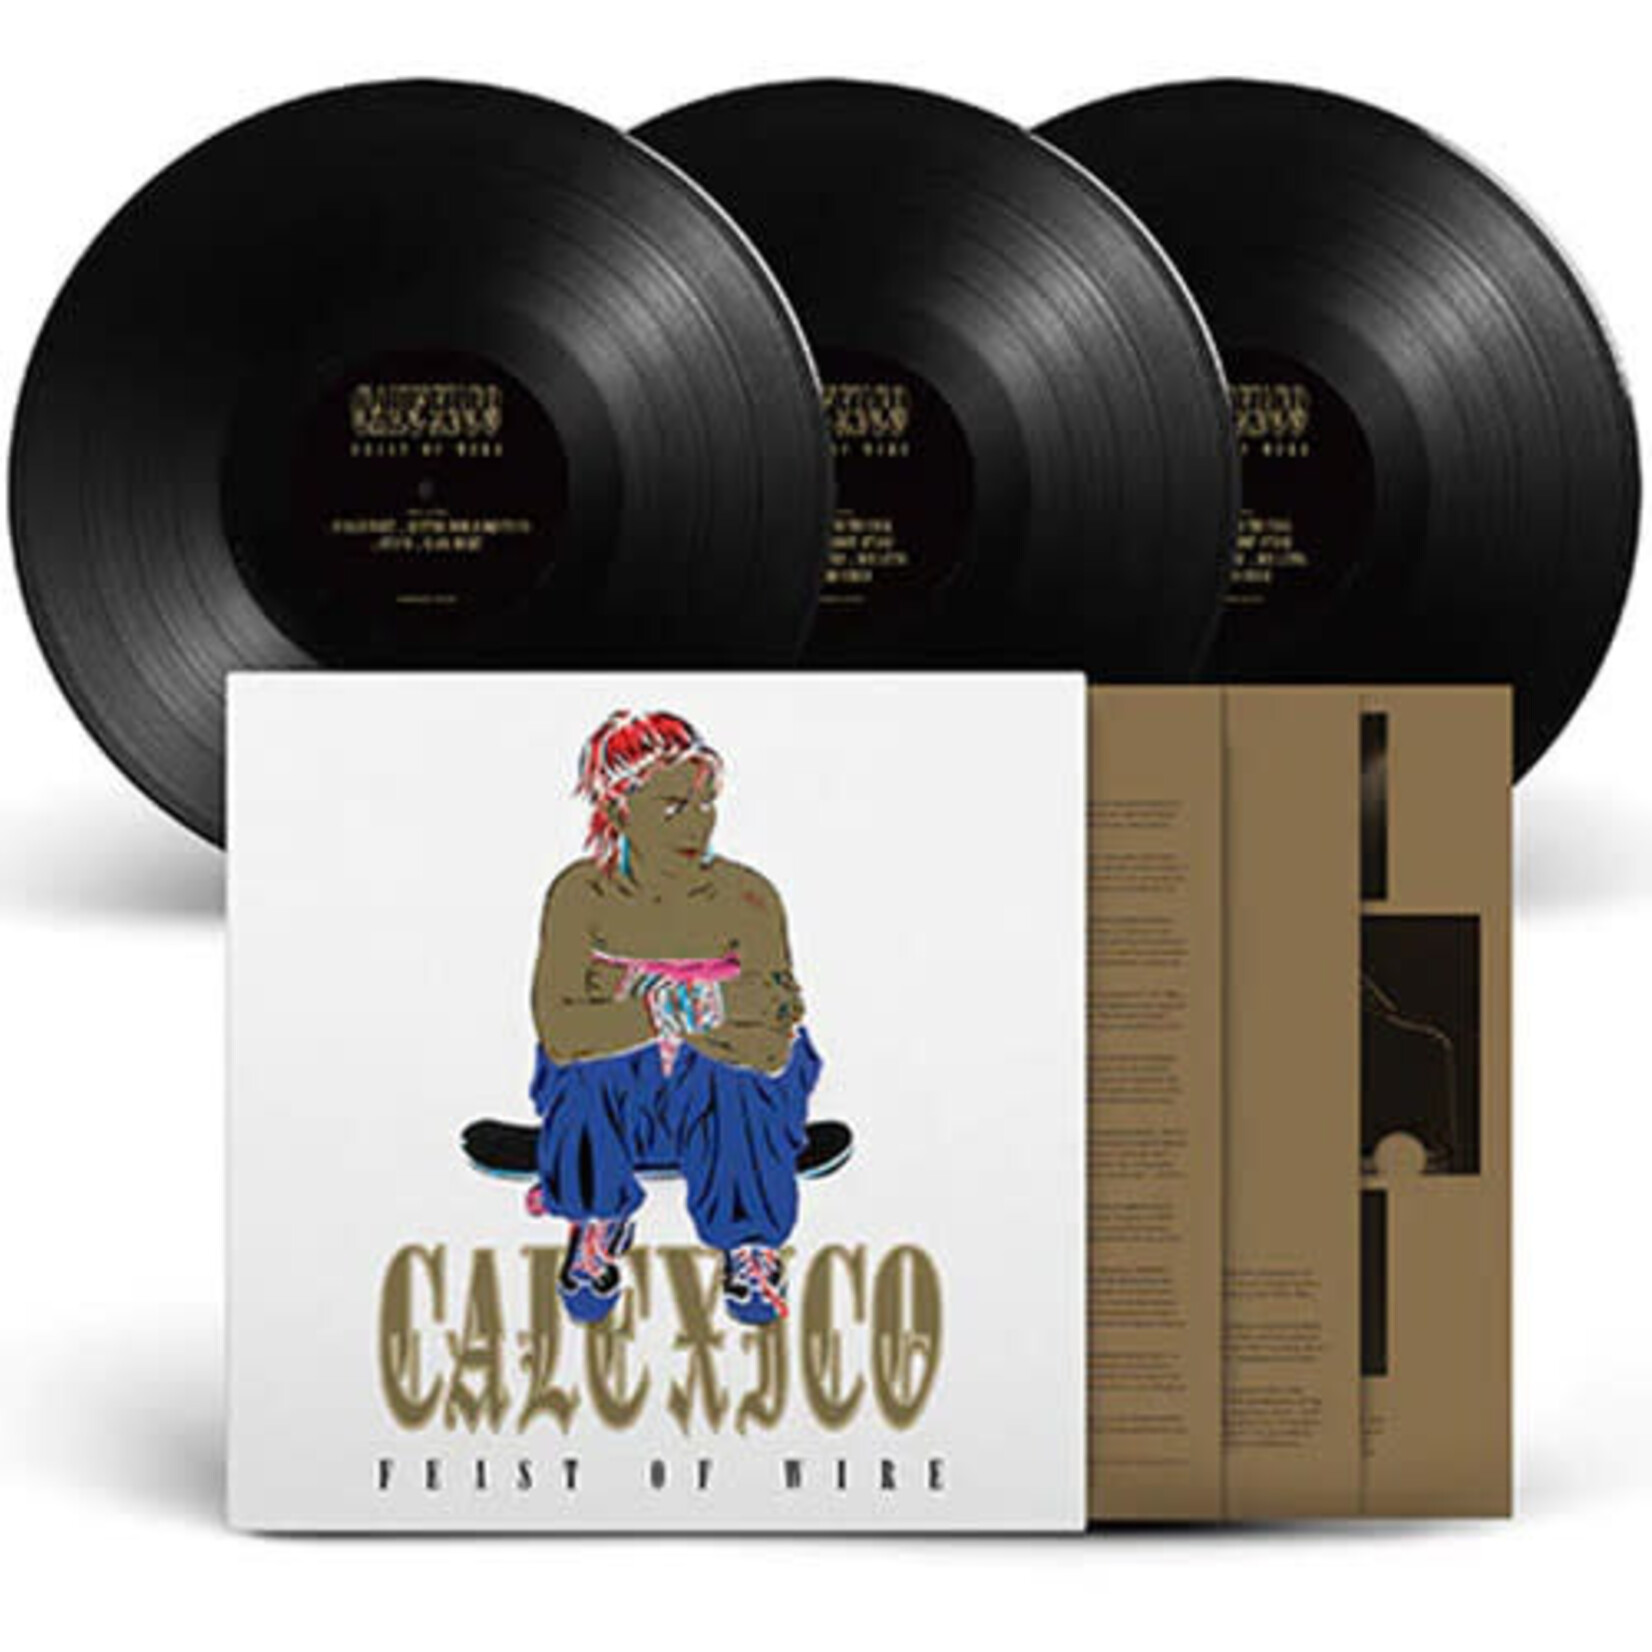 Calexico - Feast of Wire (3LP) [20th]